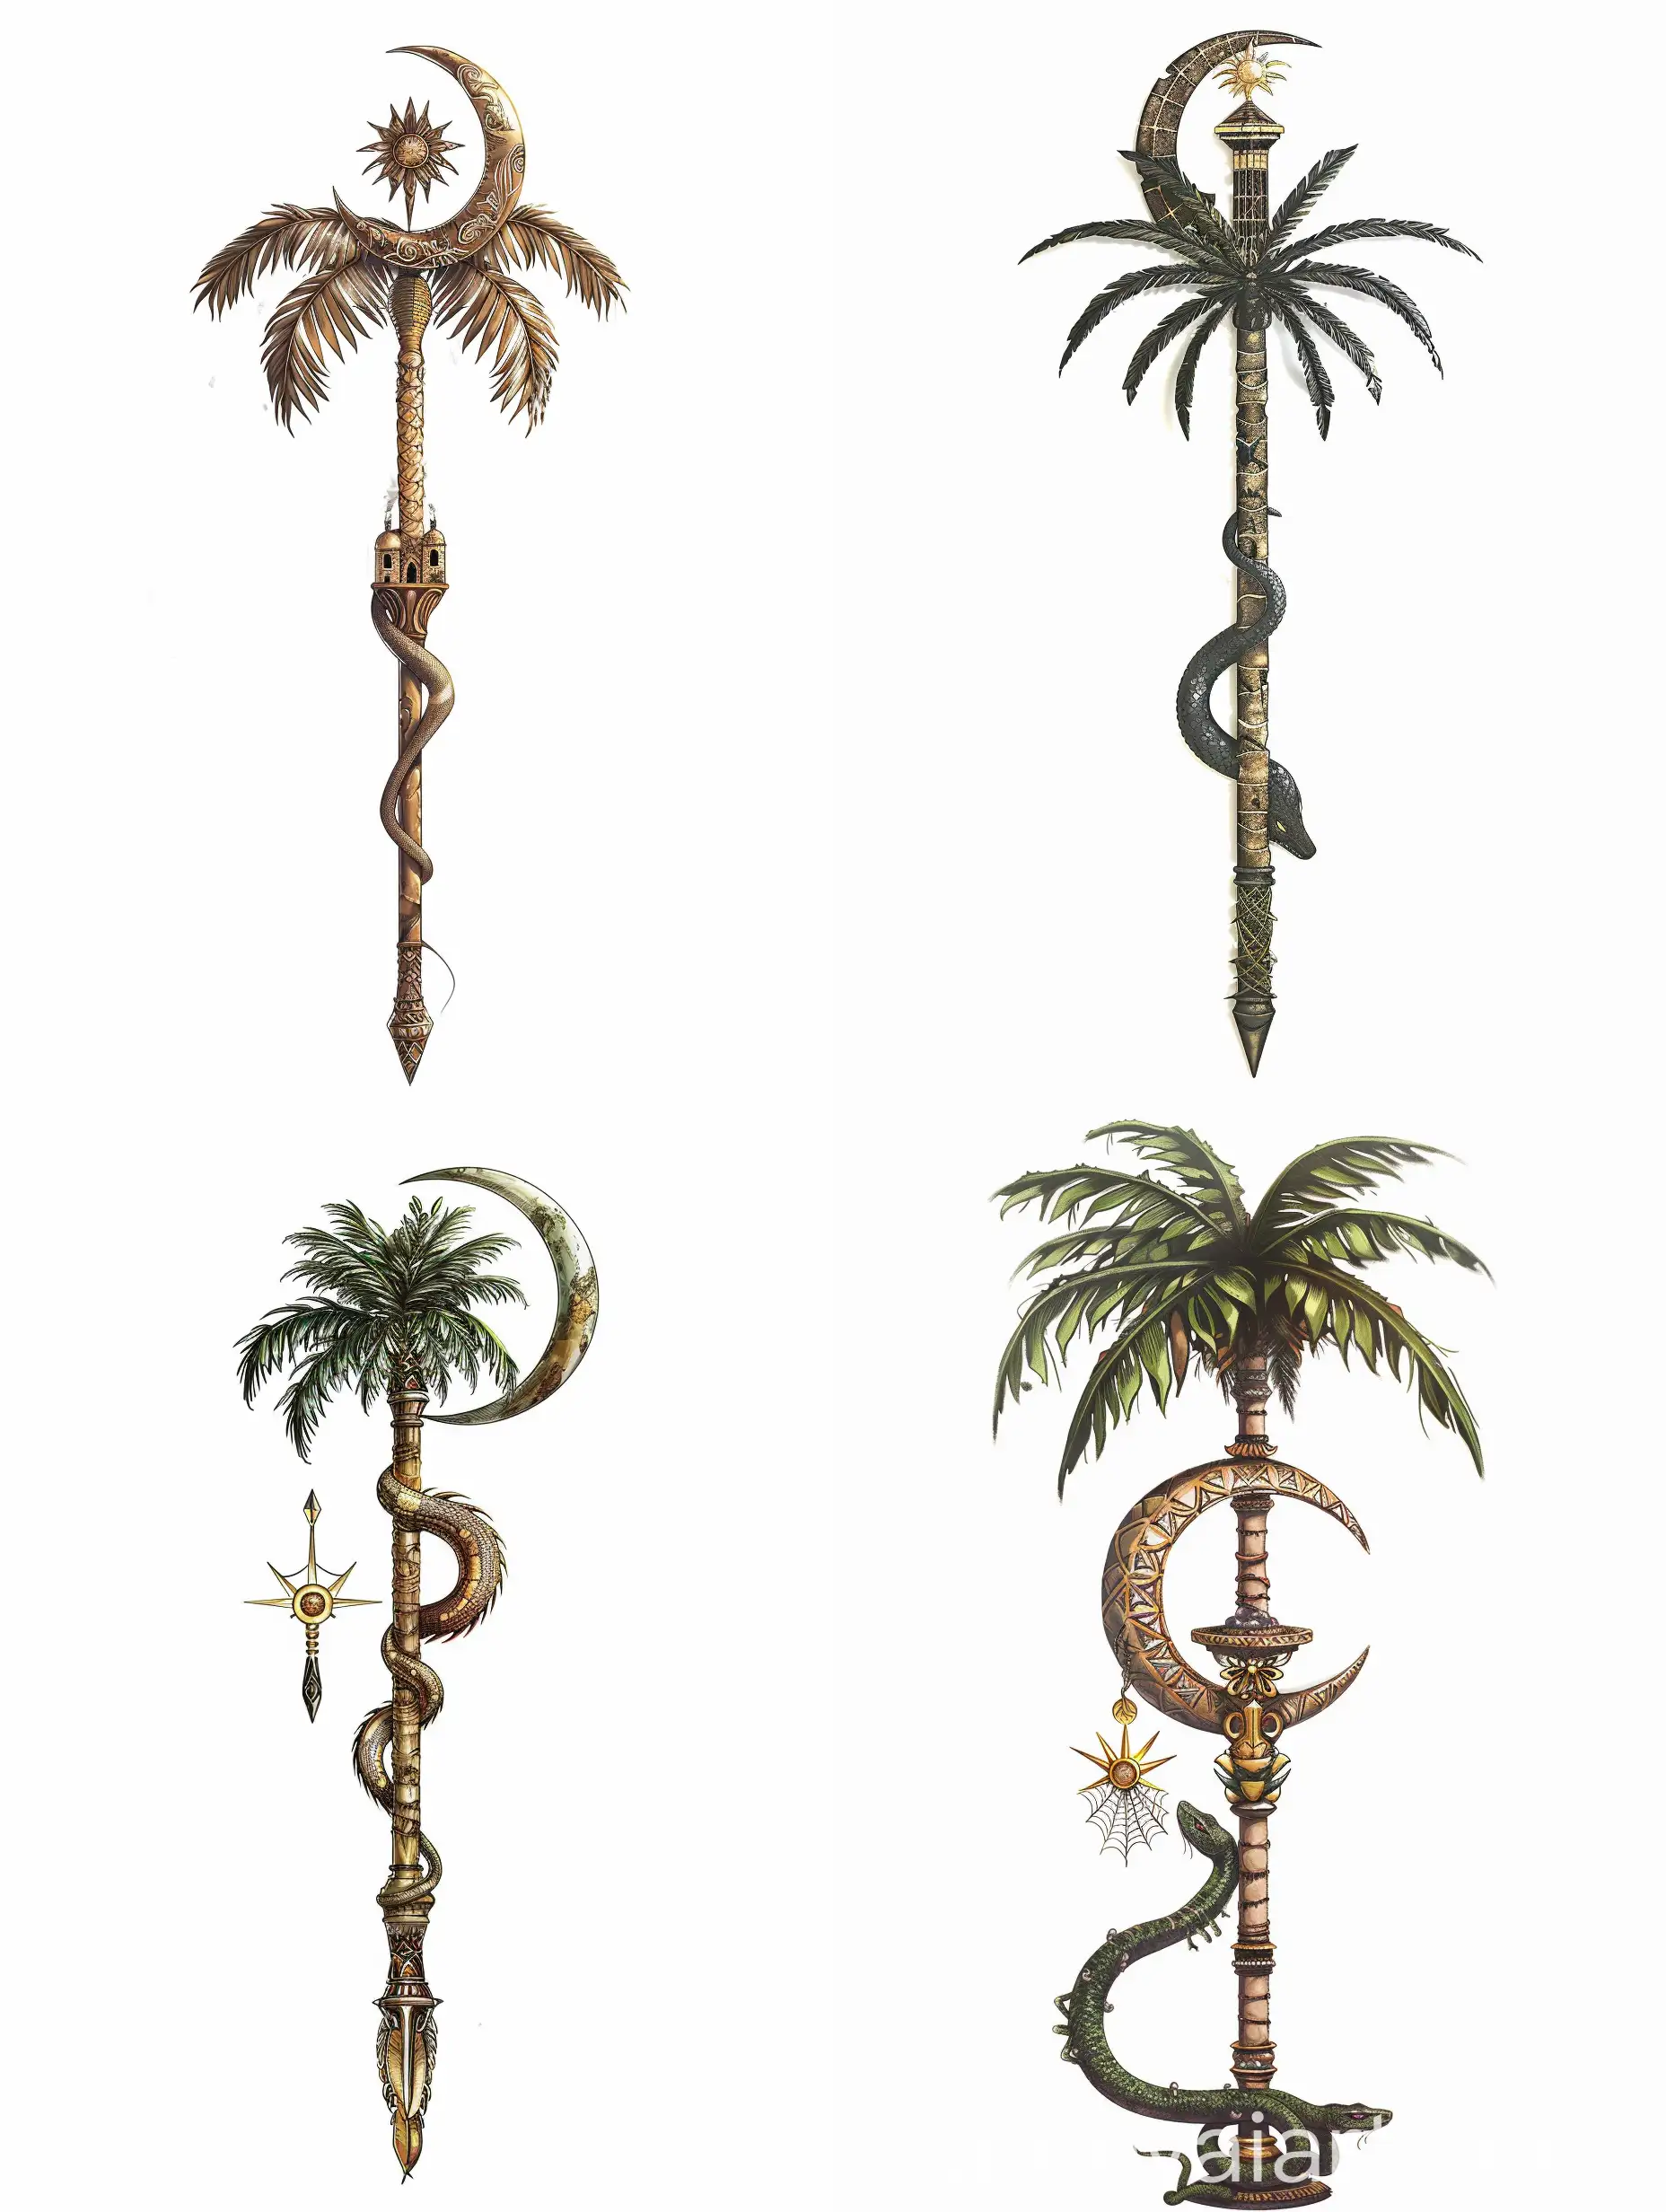 Fantasy-Magic-Staff-with-Crescent-Moon-and-Egyptian-Themes